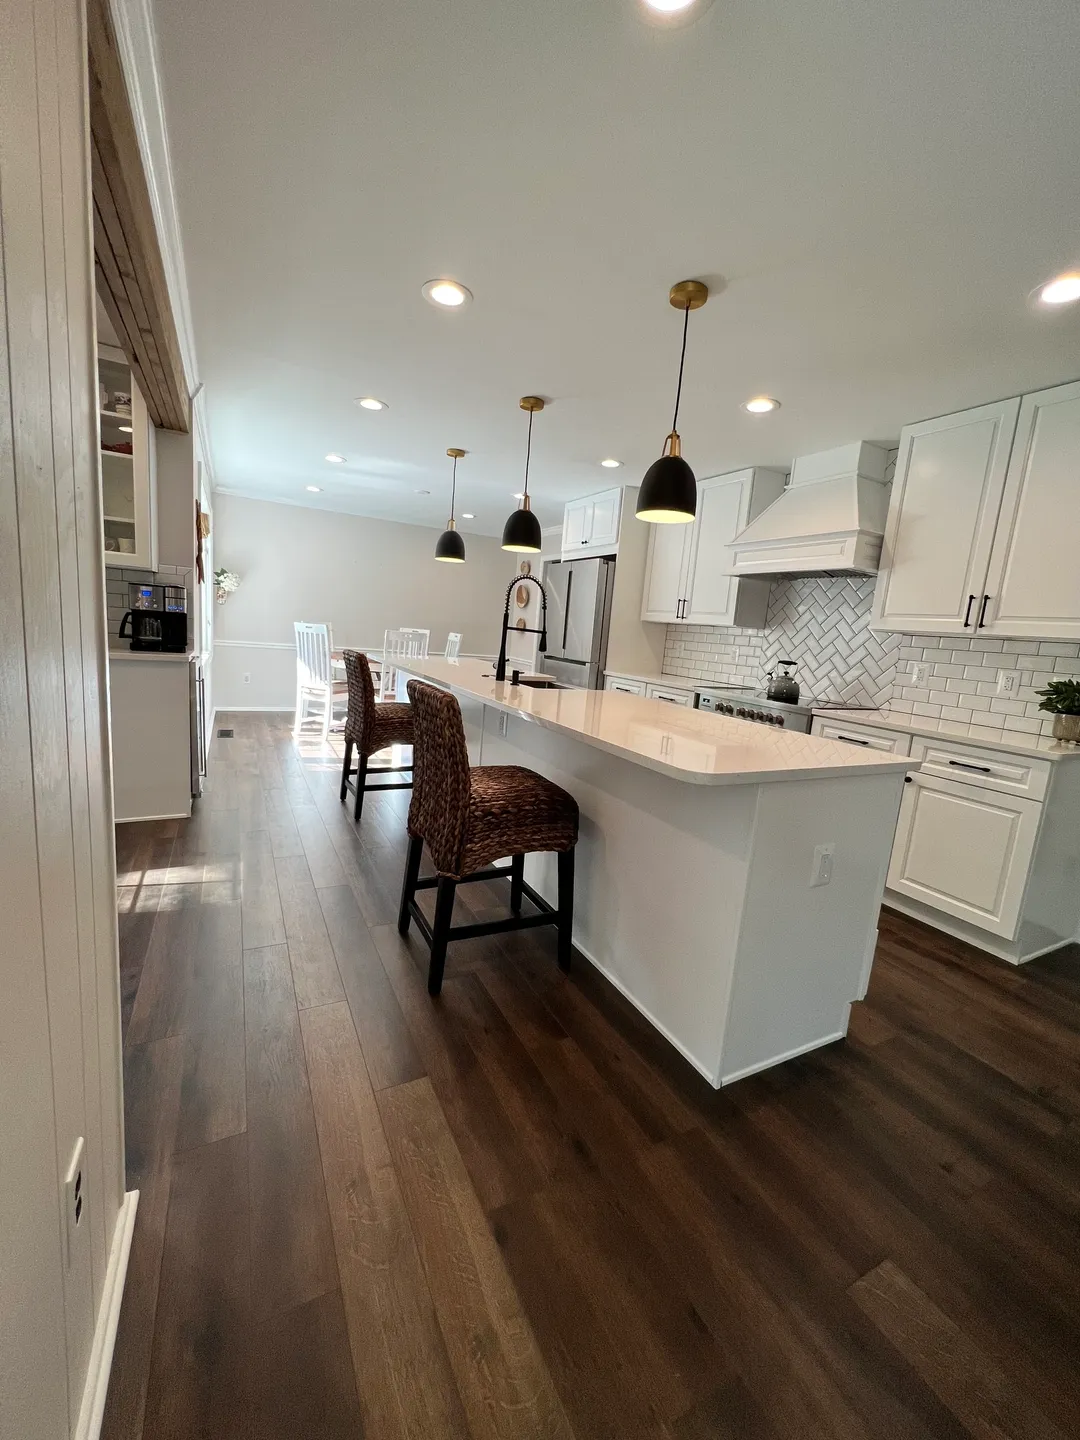 A kitchen with white cabinets and wood floors.